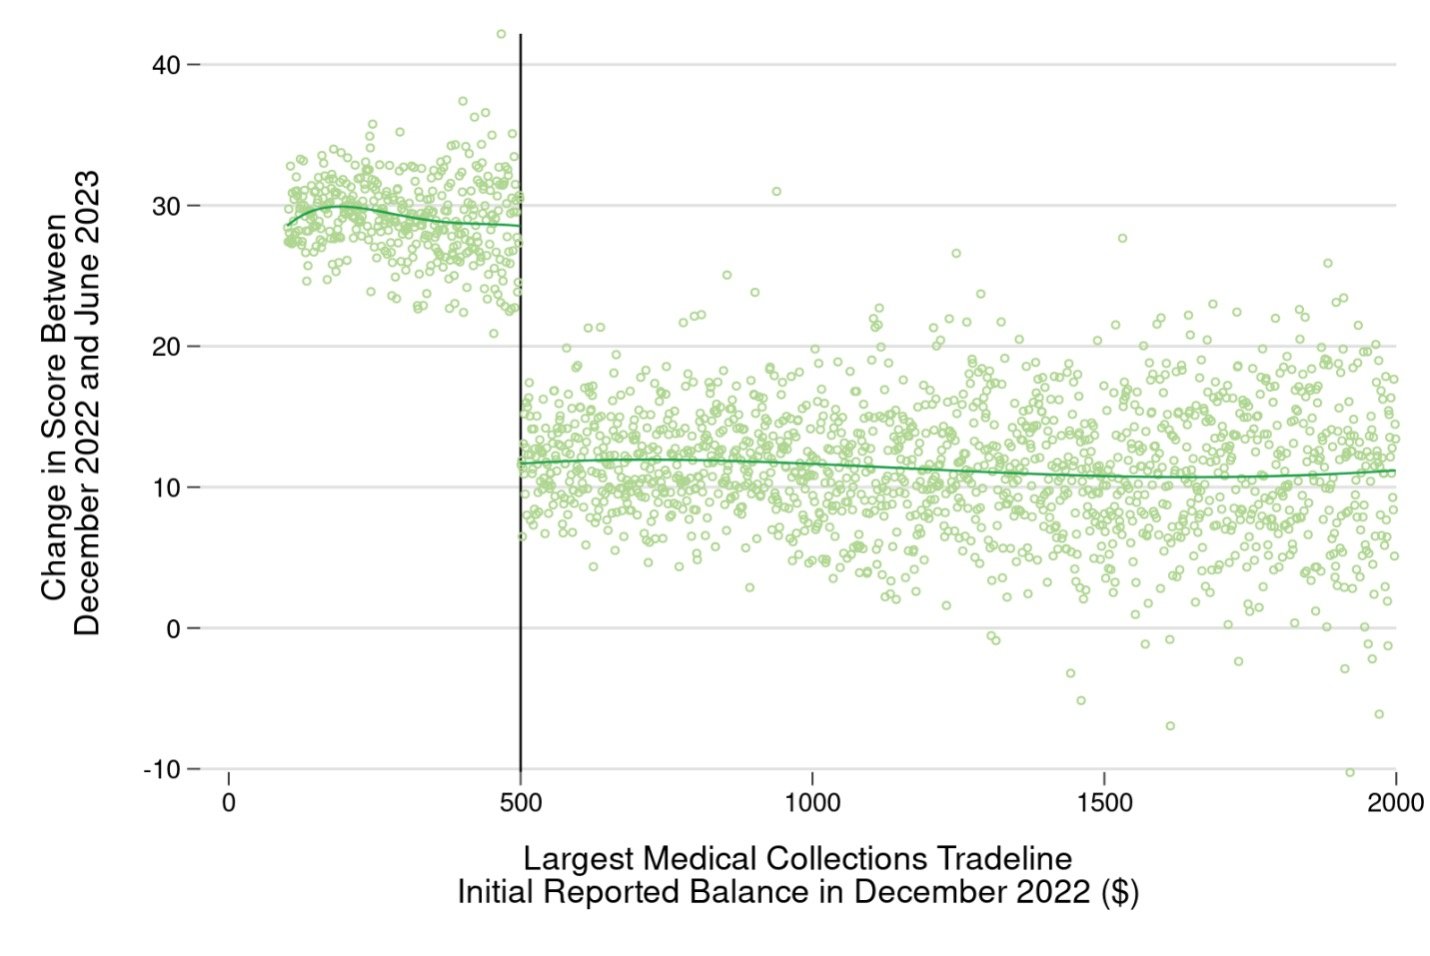 A scatterplot showing the average change in FICO score between December 2022 and June 2023 on the vertical axis, with a dot for each dollar value of the highest medical collections tradeline balance in December 2022. The plot shows a cloud of points around a 30 point increase below $500, then a jump to a distinct cloud centered at about a 10 point increase above $500.